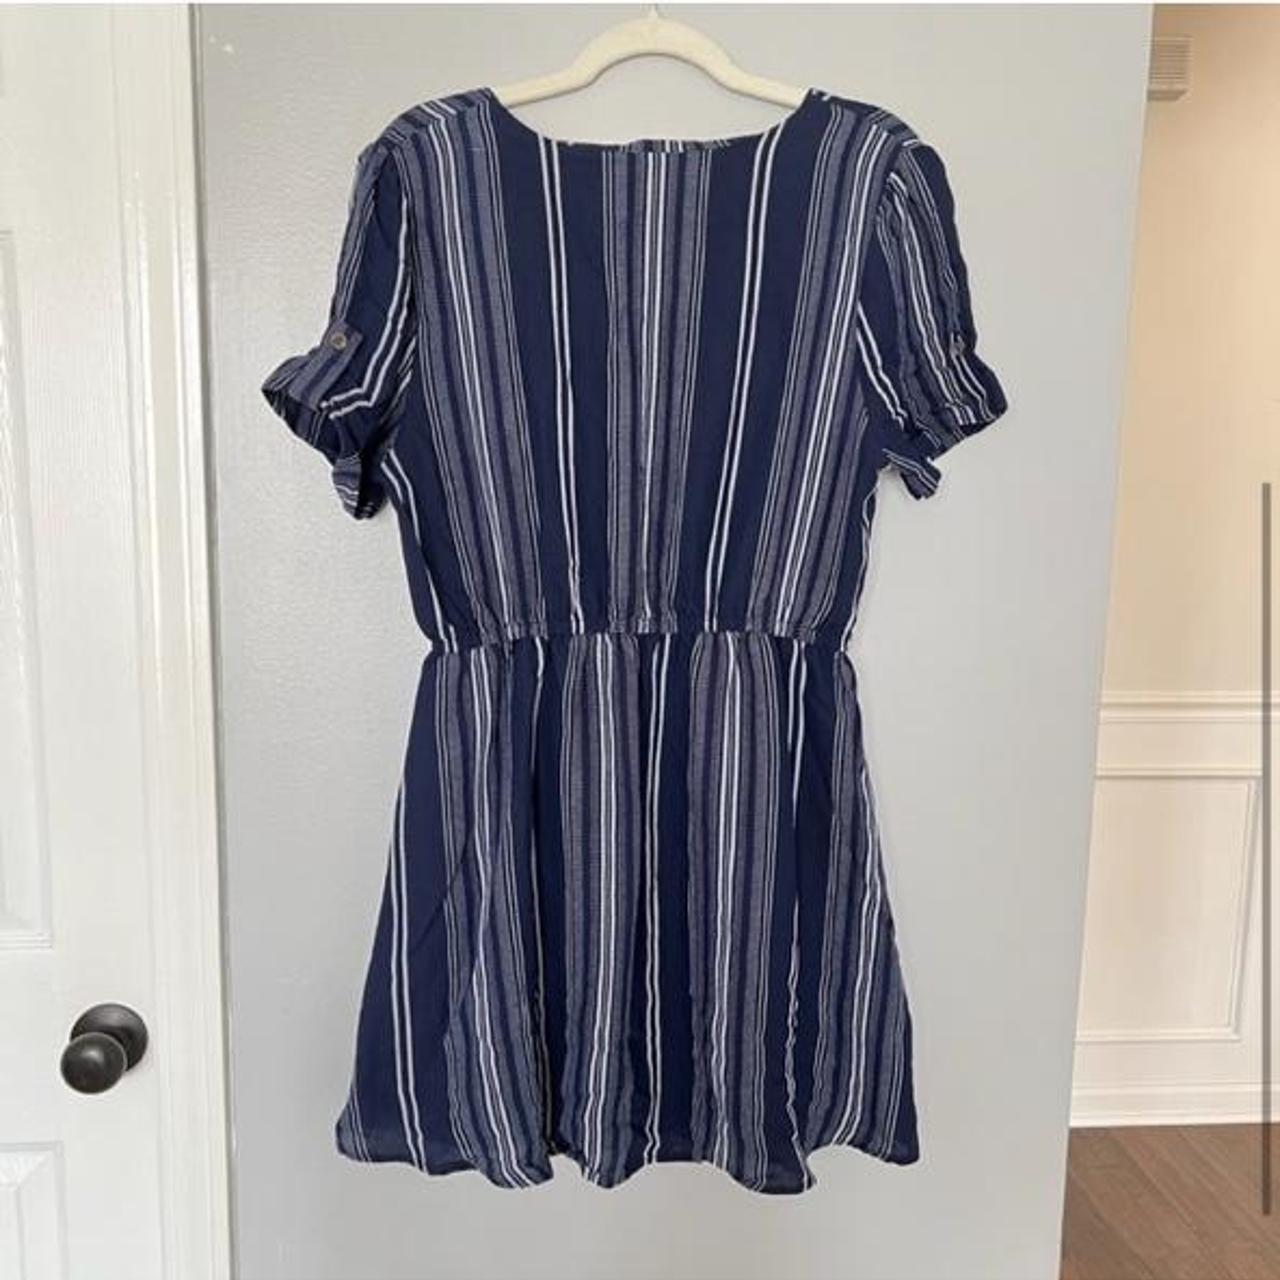 Product Image 2 - Boutique navy stripe dress
Never worn